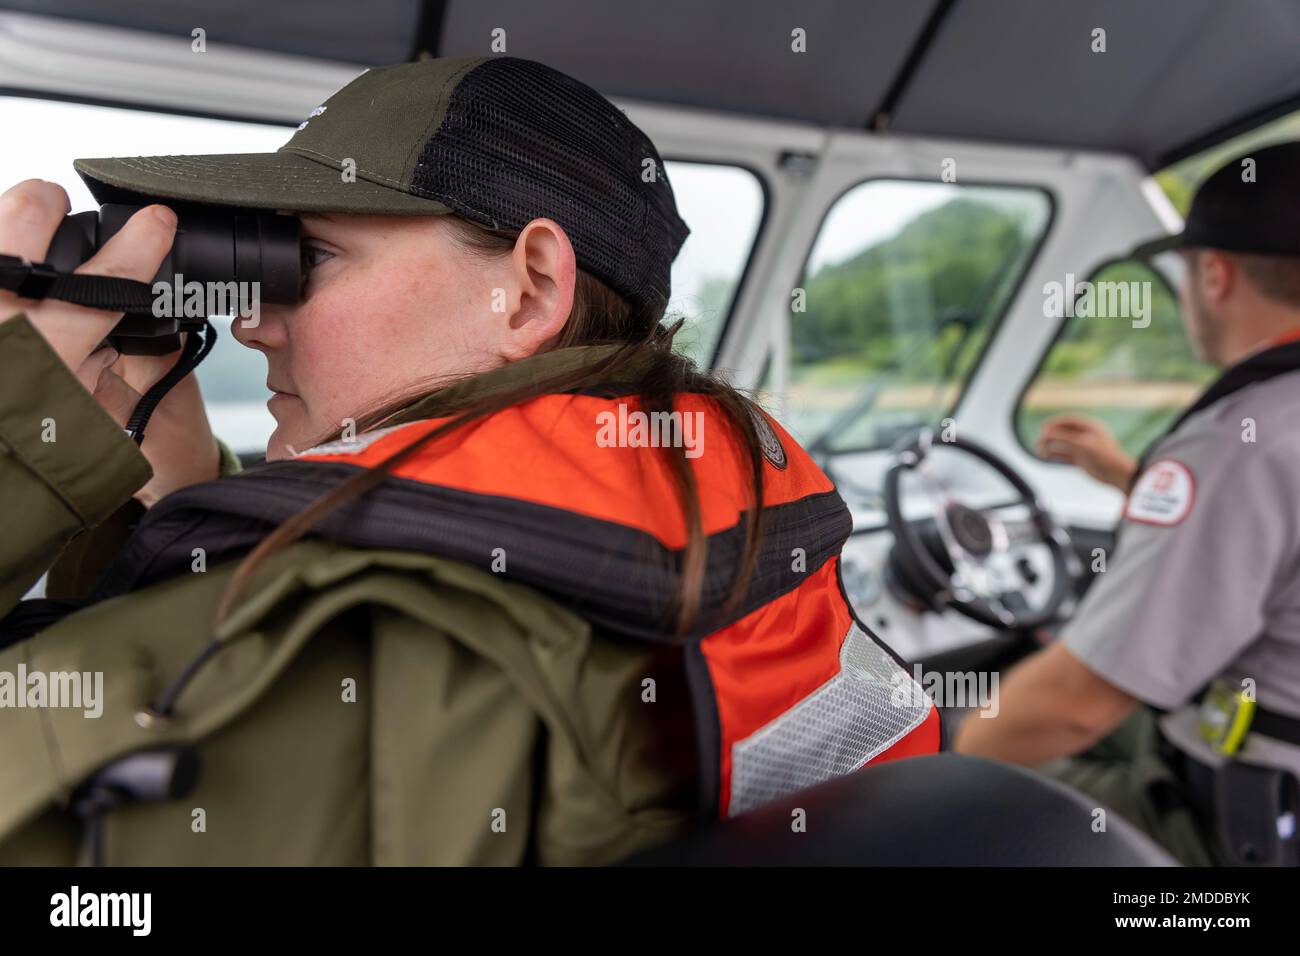 Sam Phillips, a summer park ranger with U.S. Army Corps of Engineers Pittsburgh District, uses binoculars to take a closer look at boaters to ensure they’re wearing life jackets on Youghiogheny River Lake in Confluence, Pennsylvania, July 15, 2022. “We’re trying to keep everybody safe and happy on the water,” said Phillips. Stock Photo